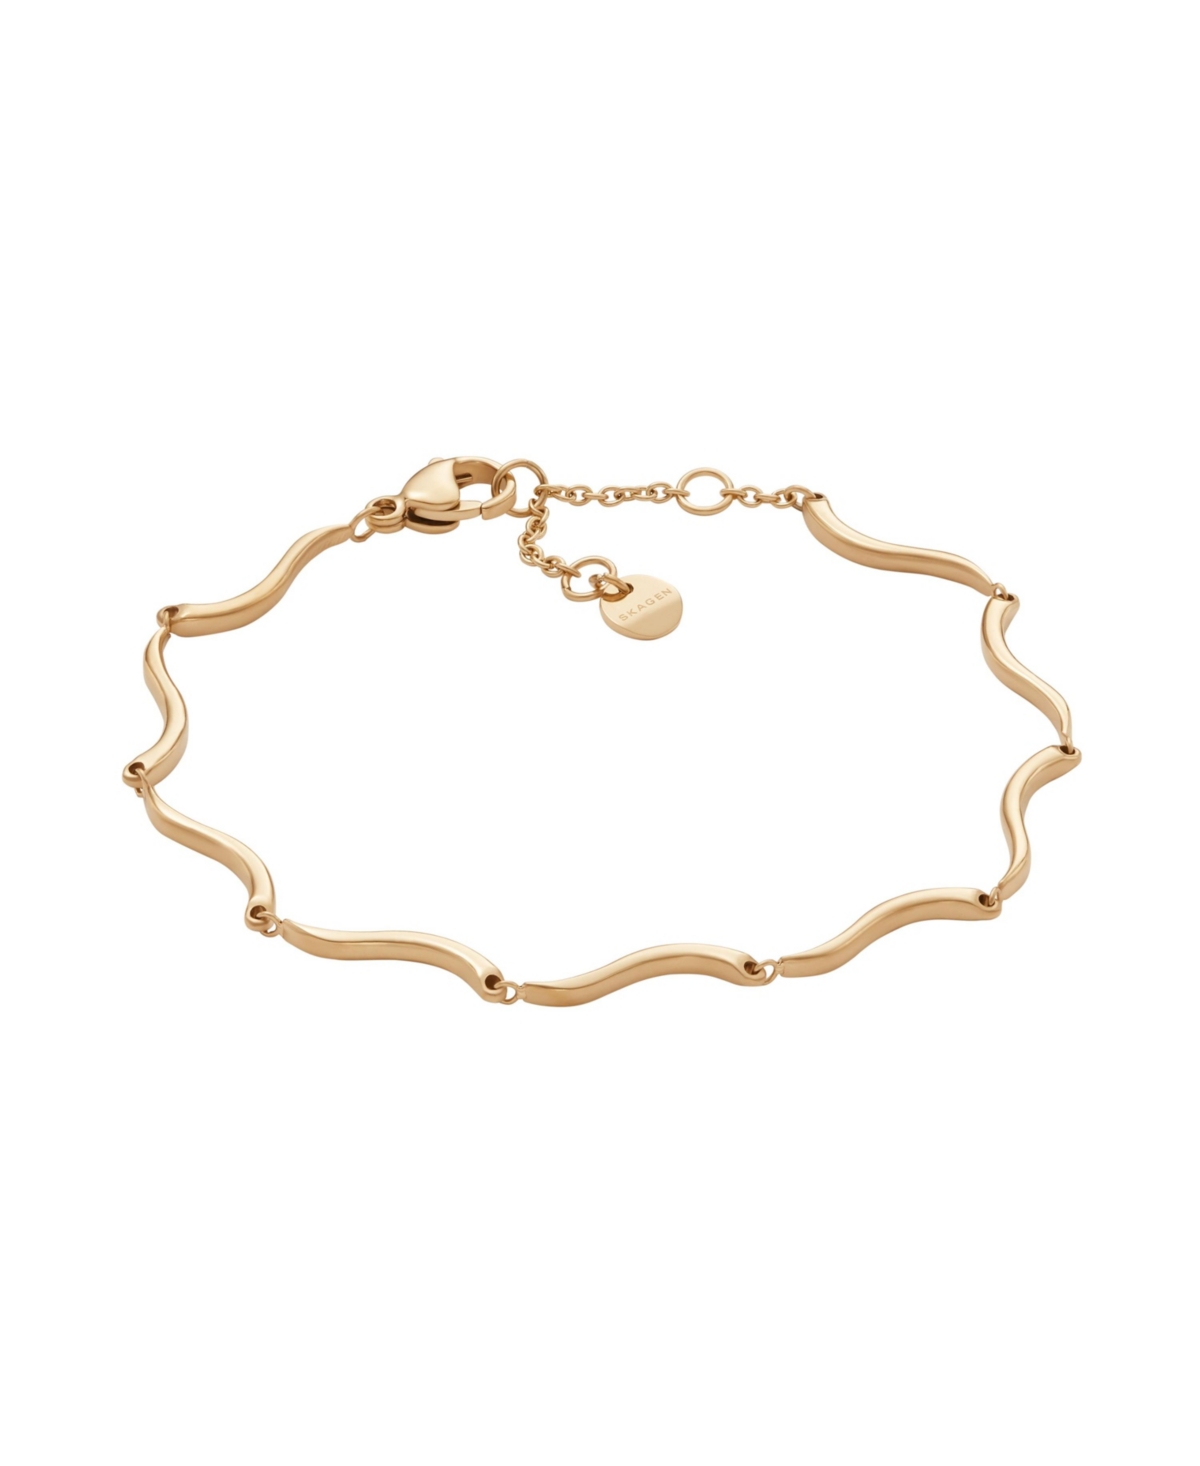 Women's Essential Waves Gold-Tone Stainless Steel Chain Bracelet - Gold